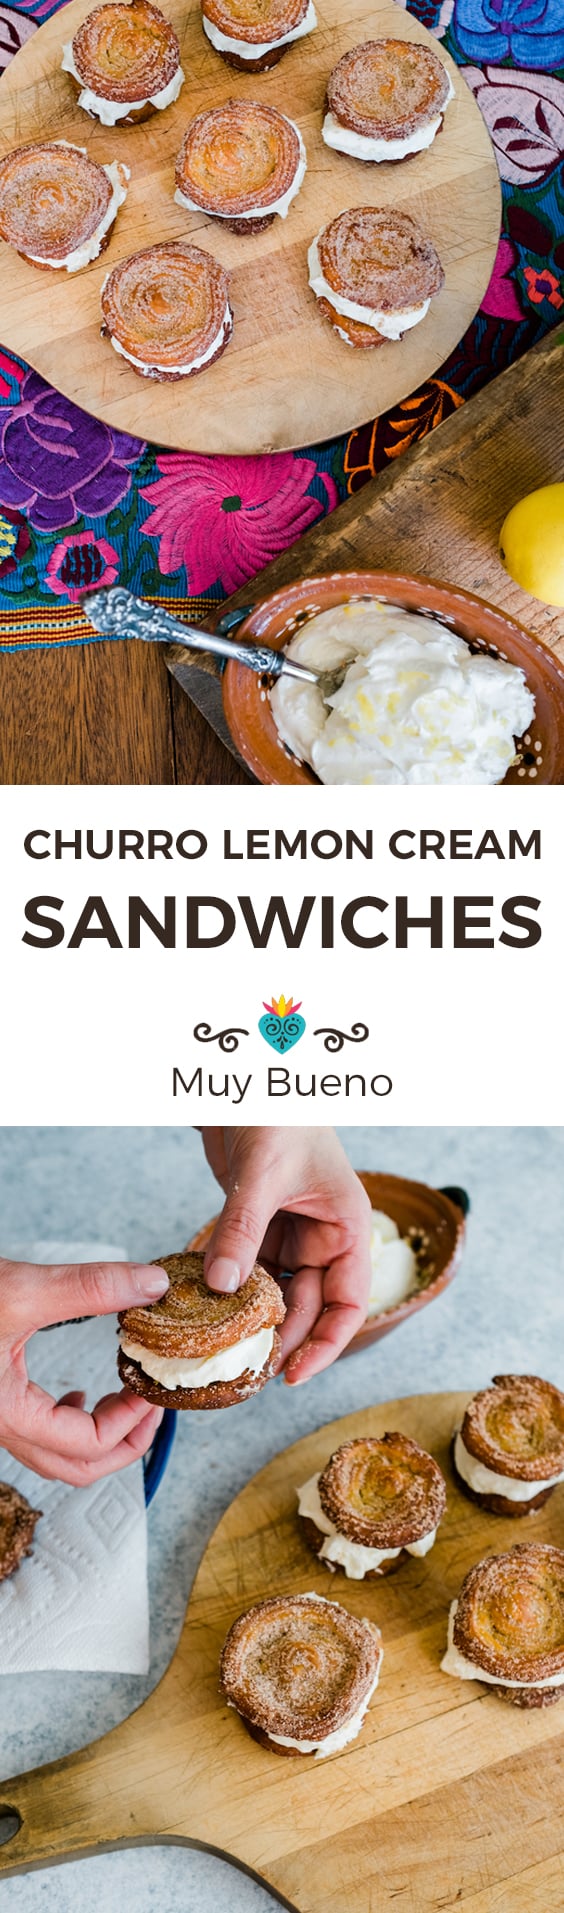 Churro Lemon Cream Sandwiches super long collage with text overlay